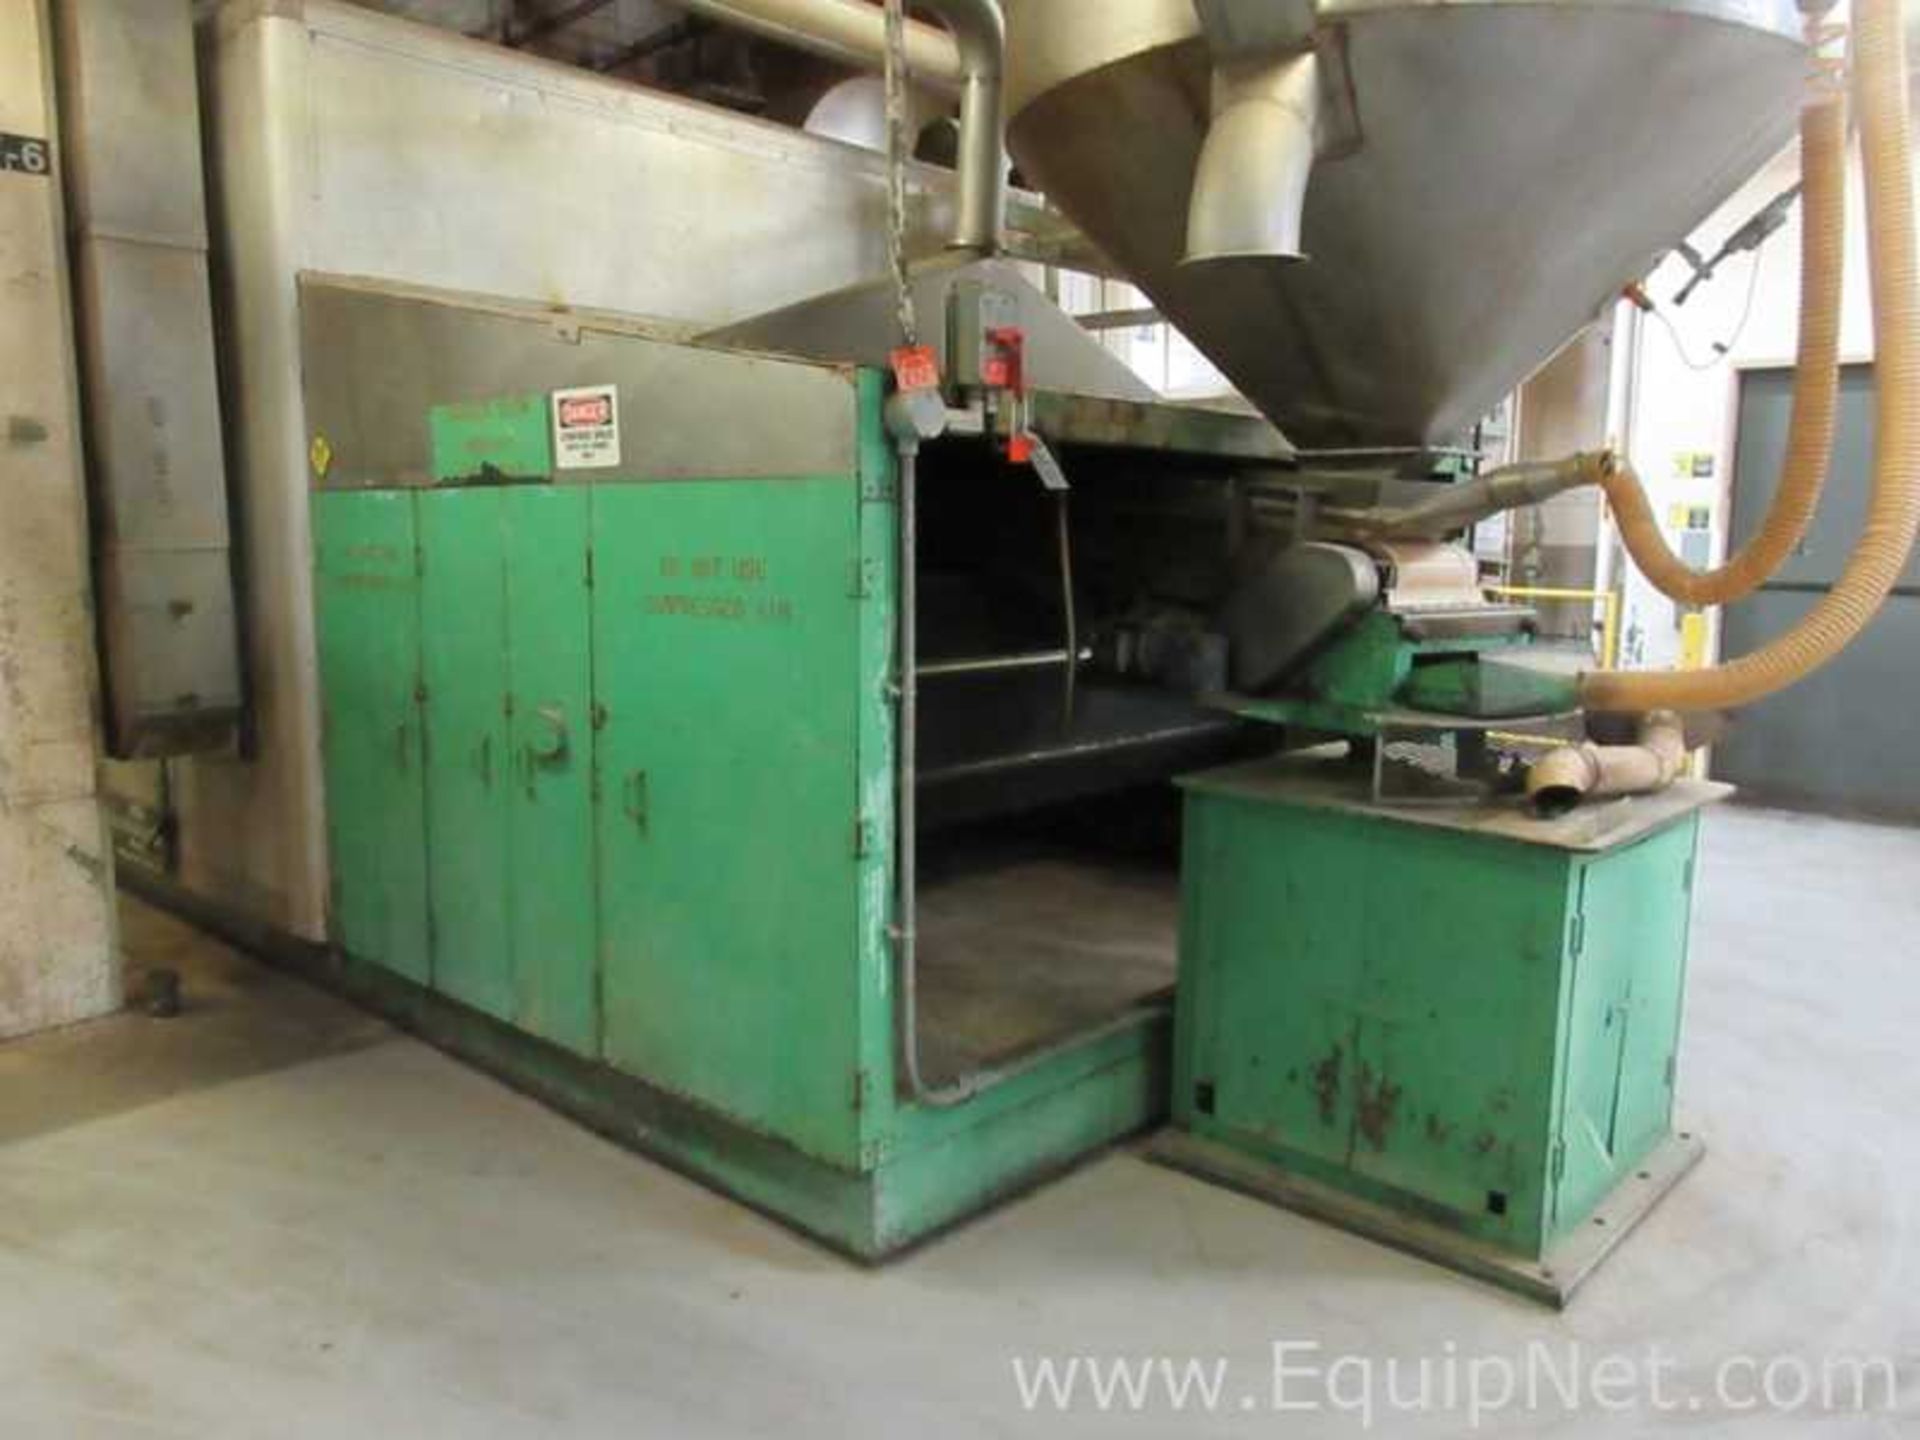 EQUIPNET LISTING #597061; REMOVAL COST: $0; DESCRIPTION: National Drying Machinery Belt - Image 21 of 27